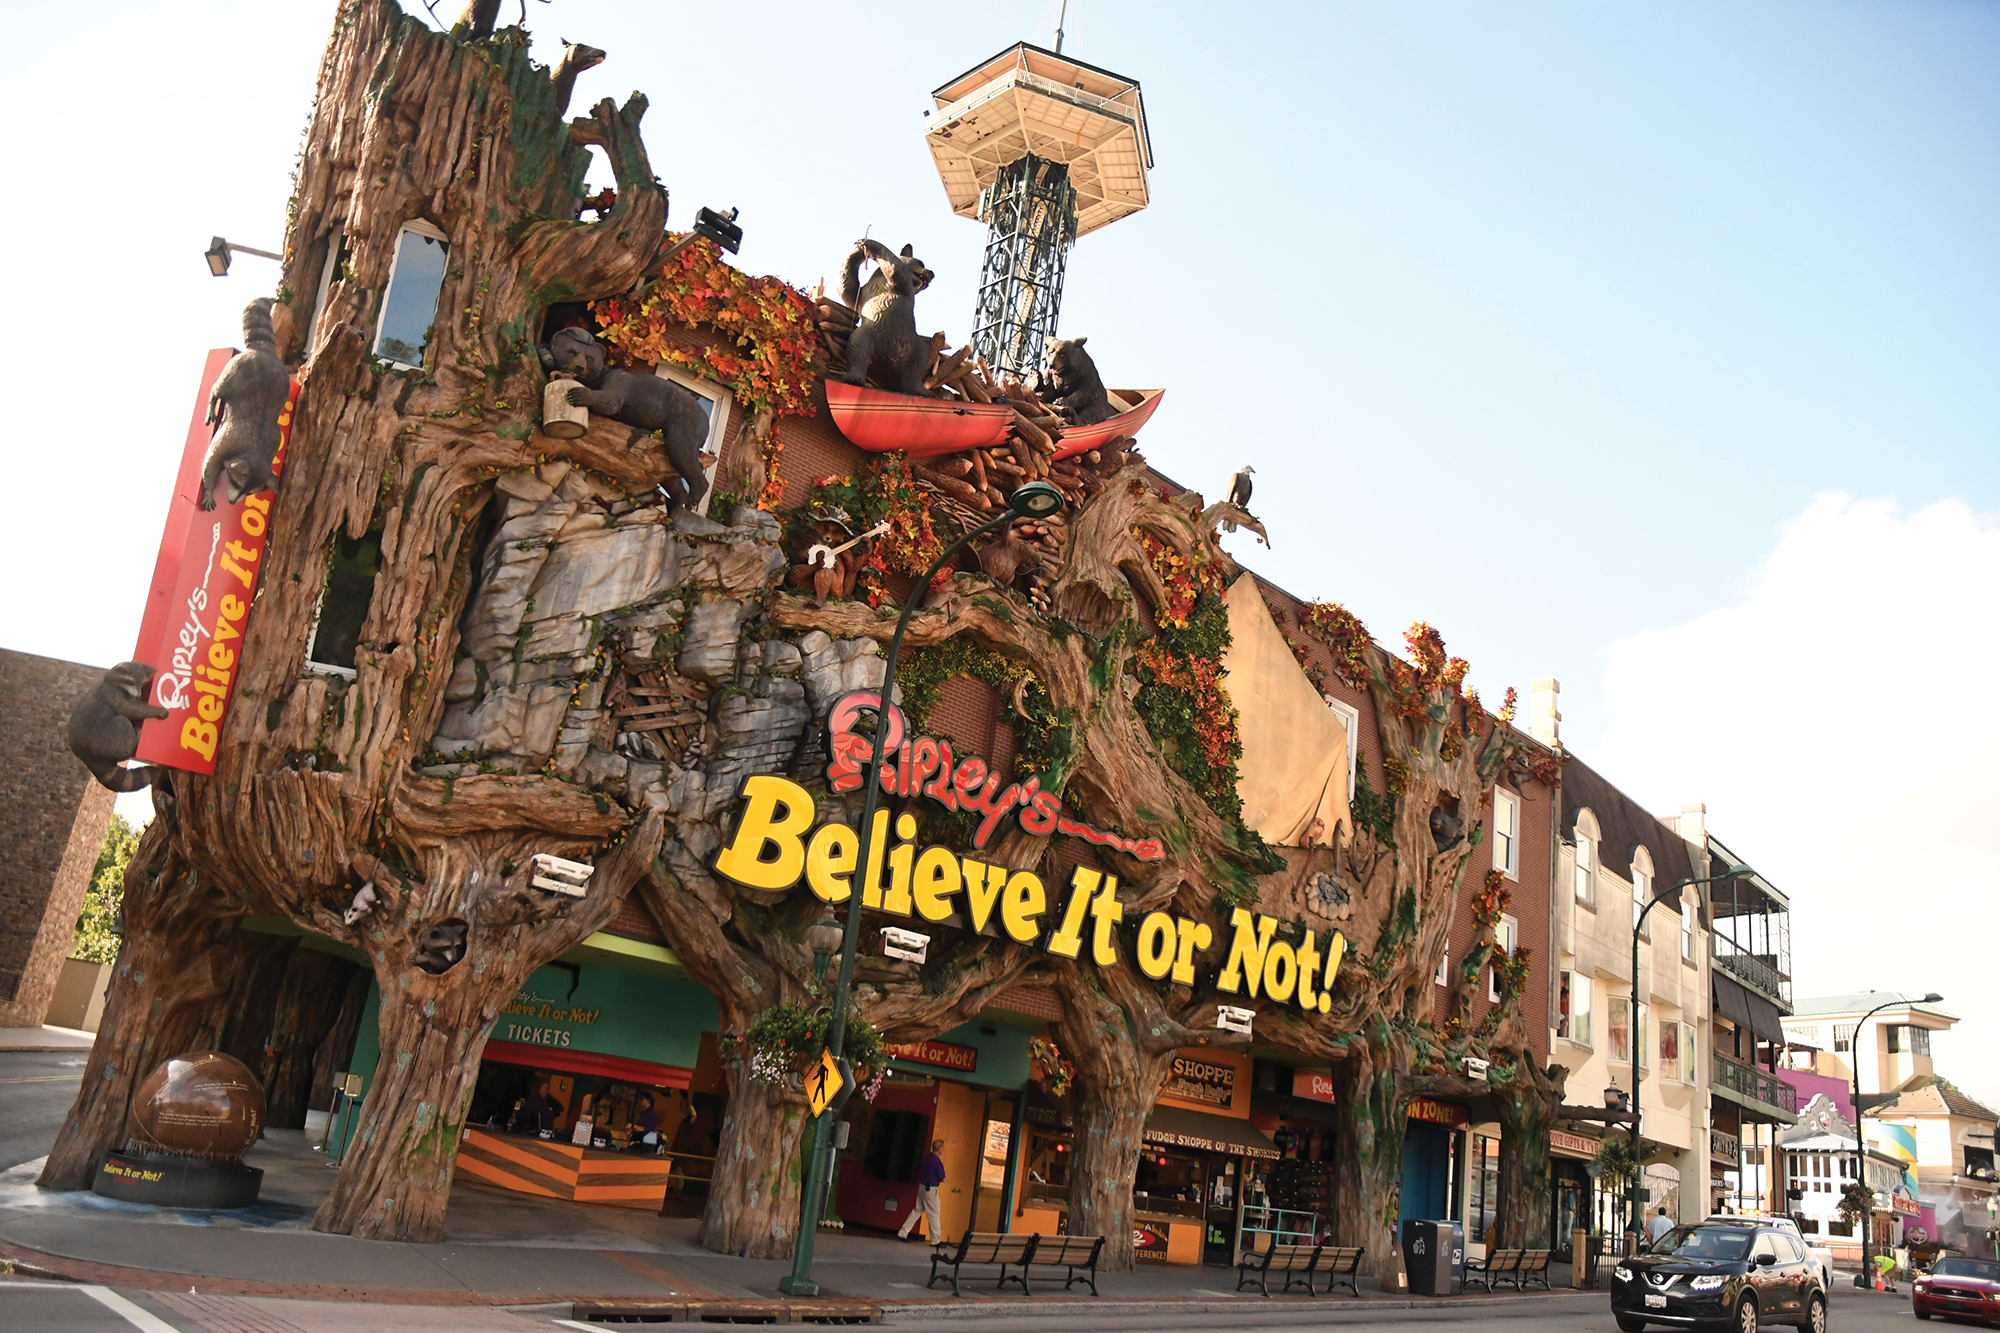 The Ripley’s Believe it or Not attraction in Gatlinburg, Tennessee, features woodlands creatures in the facade that produce sound effects.